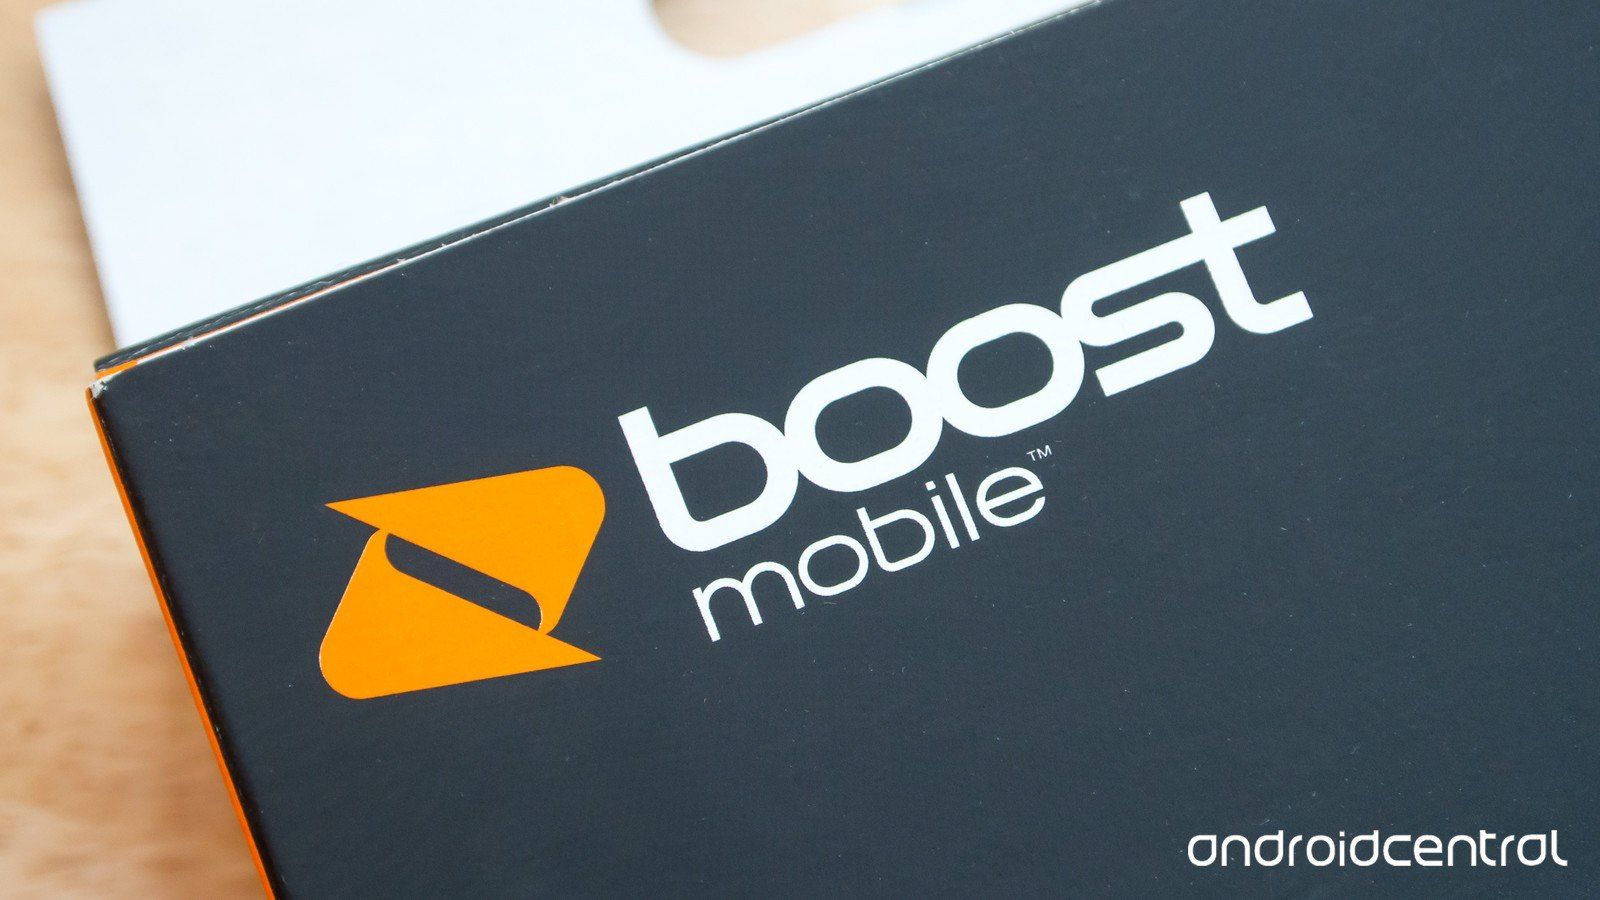 Boost Mobile Wallpapers - Wallpaper Cave